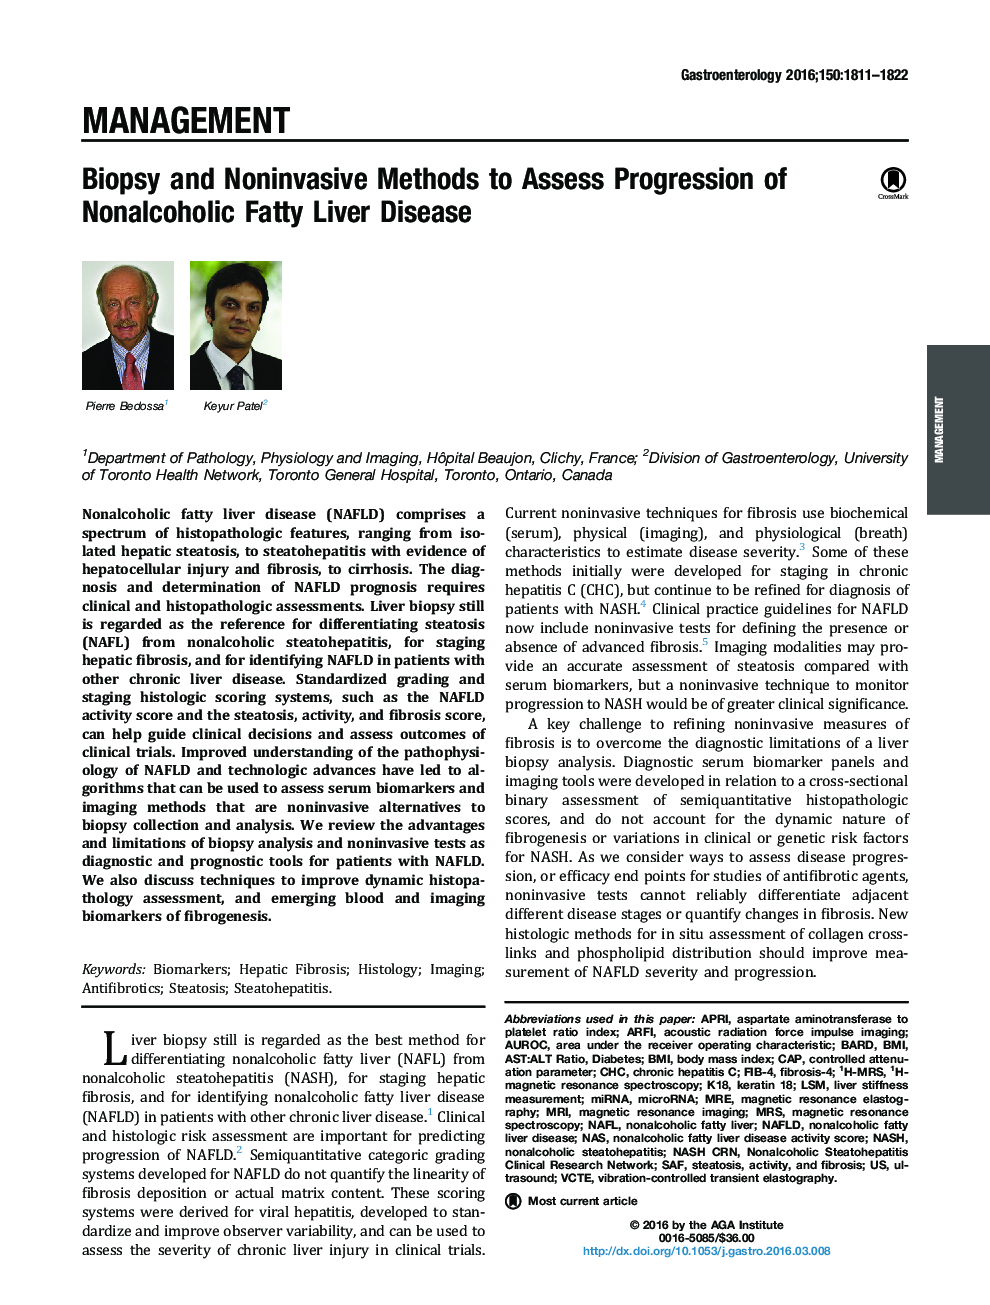 Biopsy and Noninvasive Methods to Assess Progression of Nonalcoholic Fatty Liver Disease